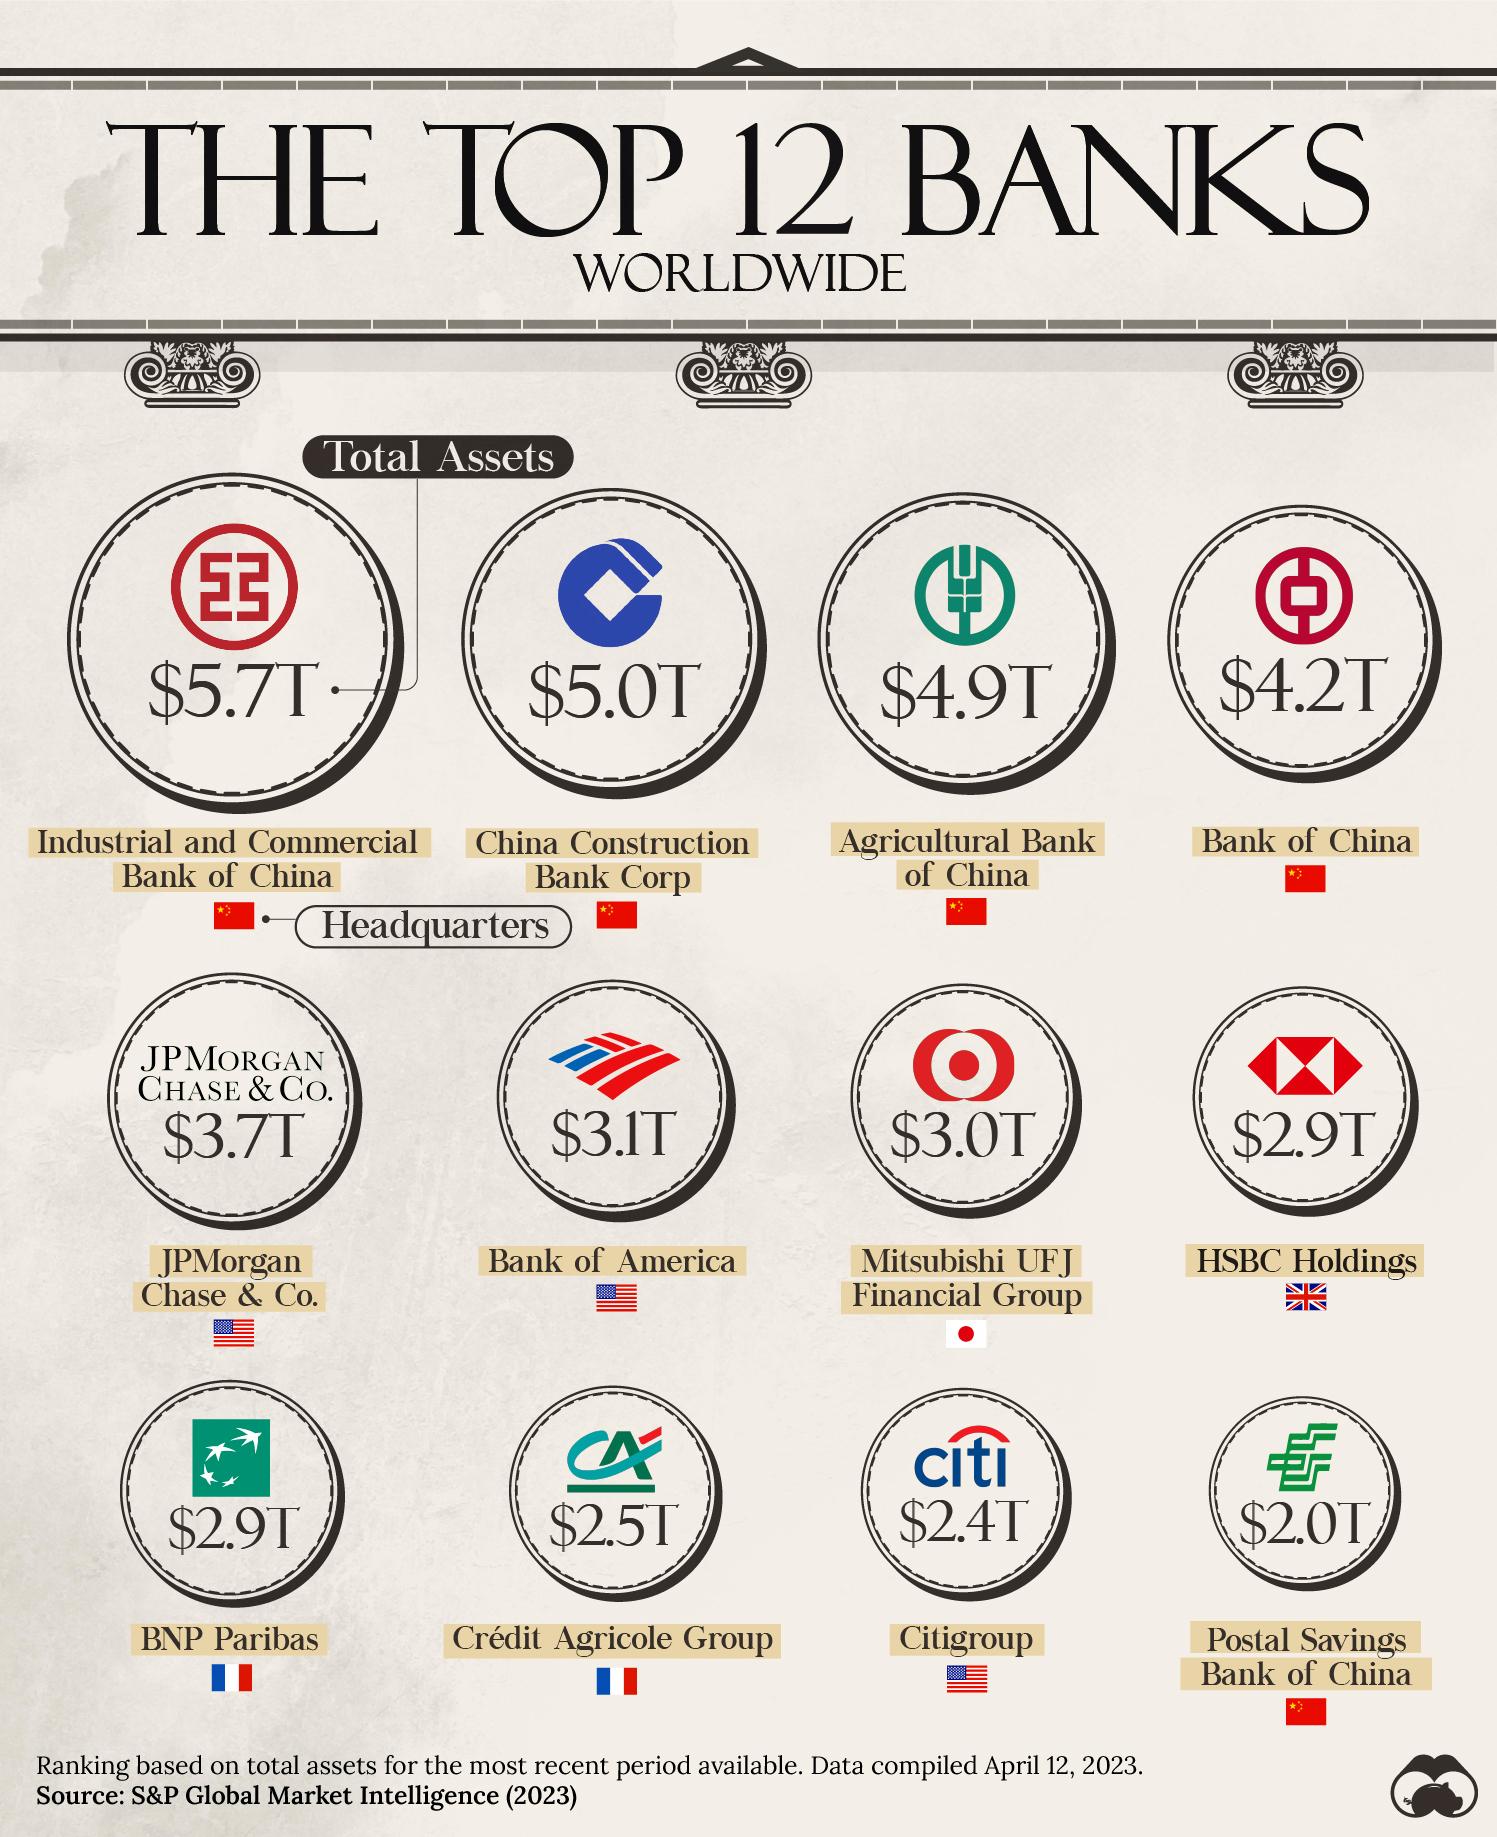 China Accounts for 5 of the World's Top 12 Banks 🏛️